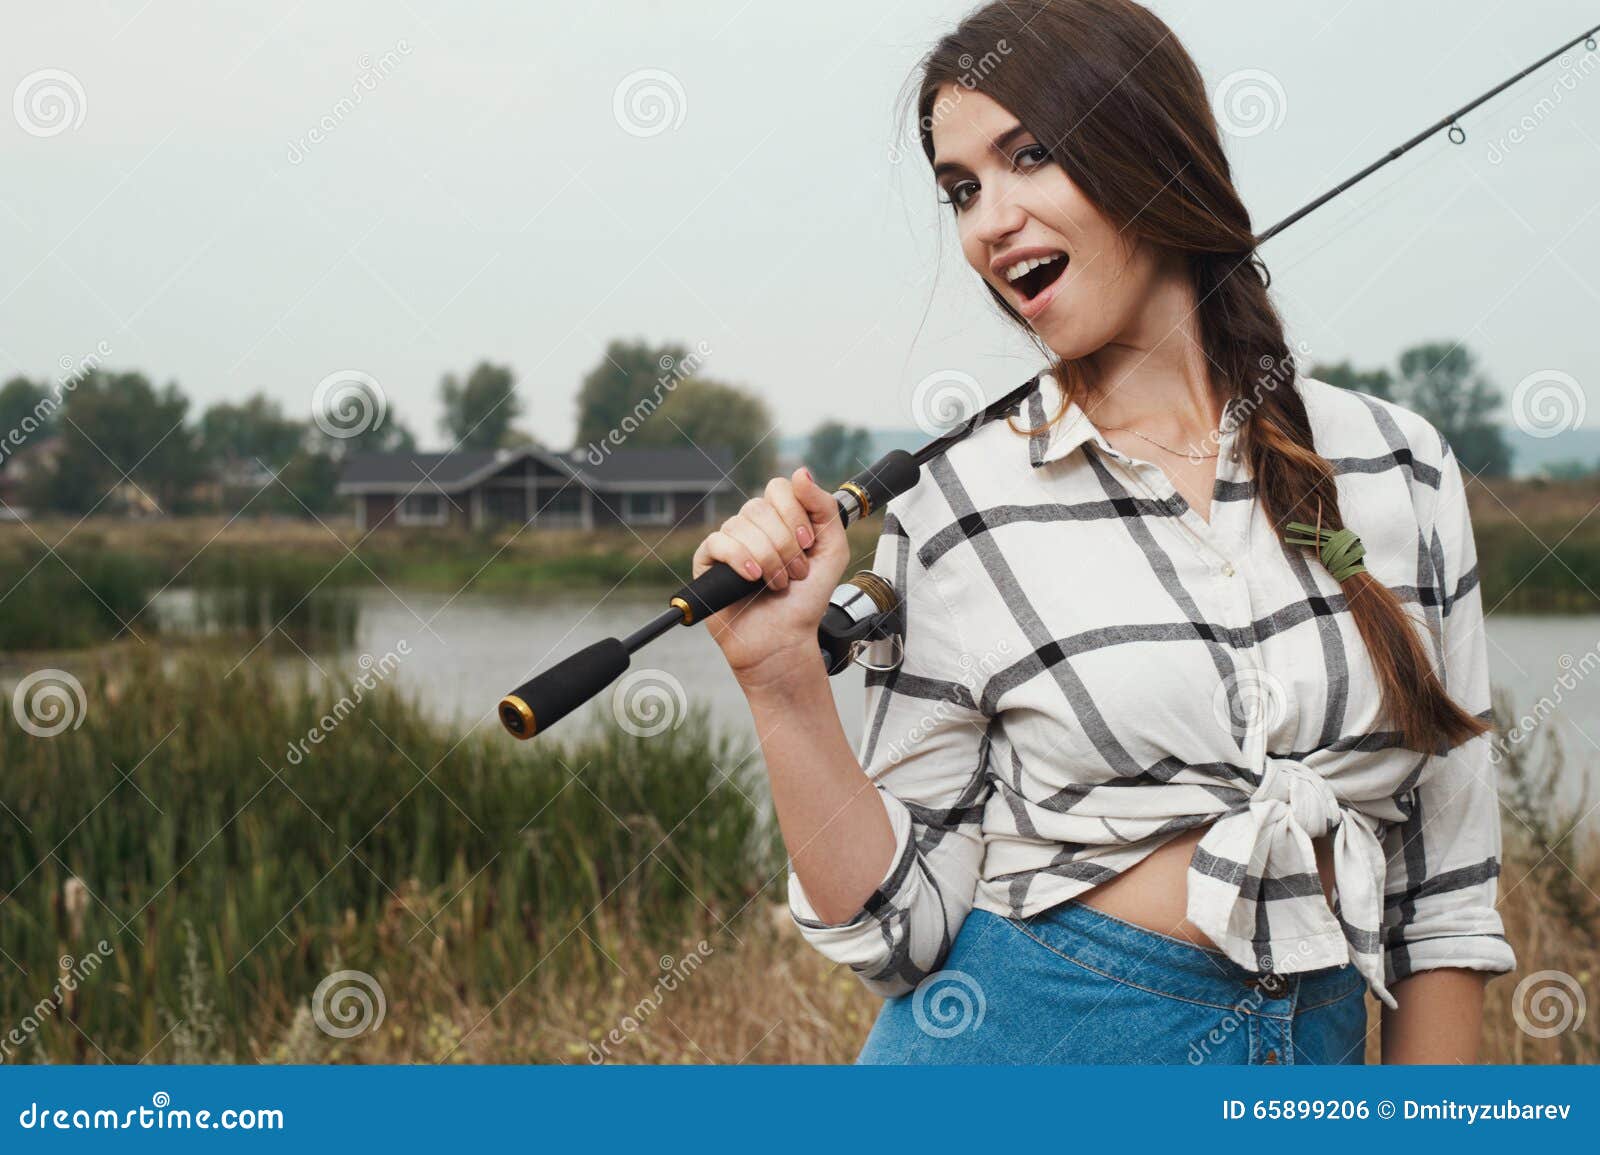 https://thumbs.dreamstime.com/z/country-lady-standing-against-pond-ranch-fish-rod-cute-rural-brown-haired-posing-house-fishing-stands-grass-65899206.jpg